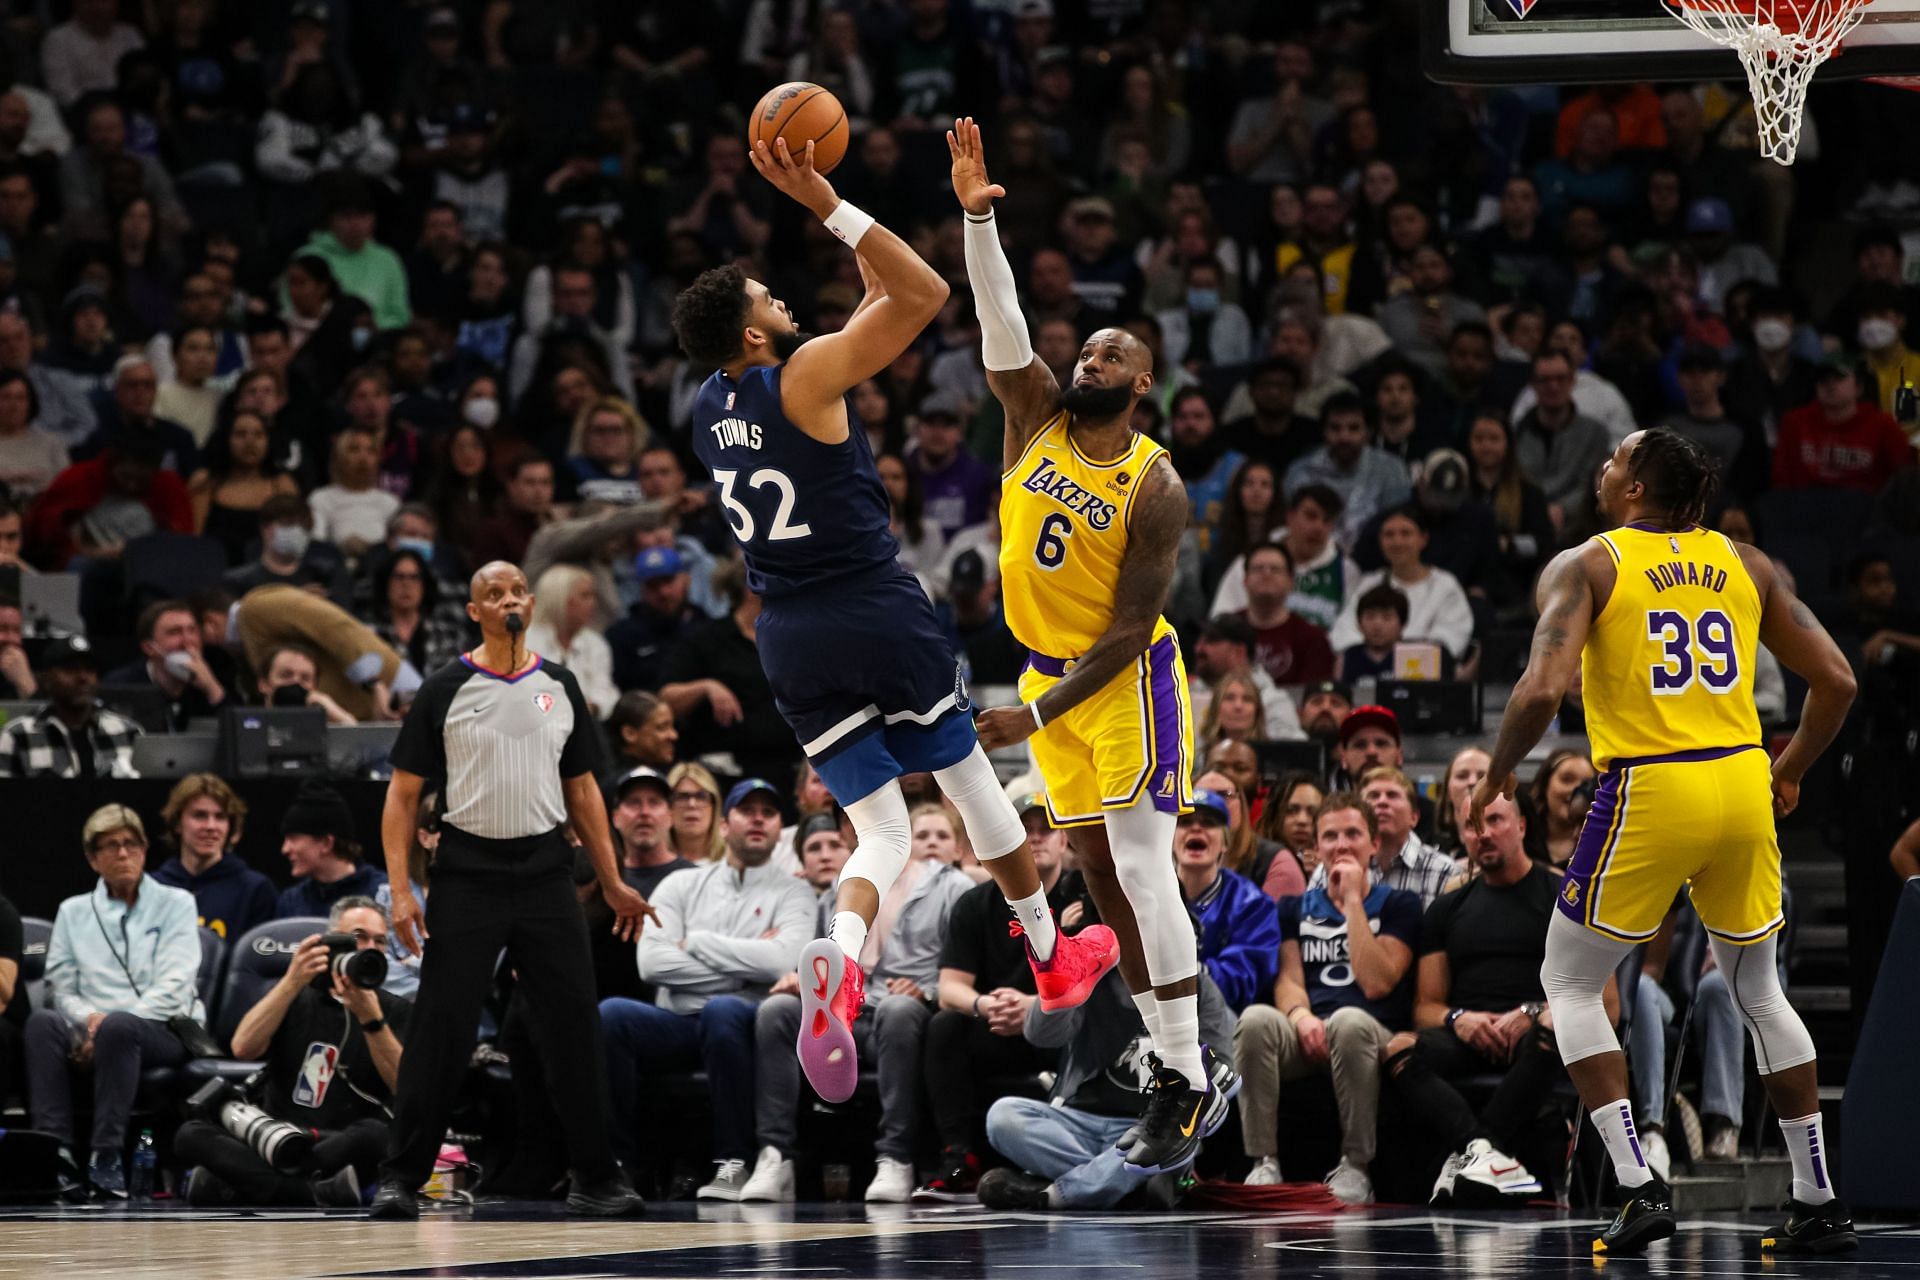 Karl-Anthony Towns of the Minnesota Timberwolves shoots the ball while LeBron James of the LA Lakers defends in the second quarter at Target Center on Wednesday in Minneapolis, Minnesota.